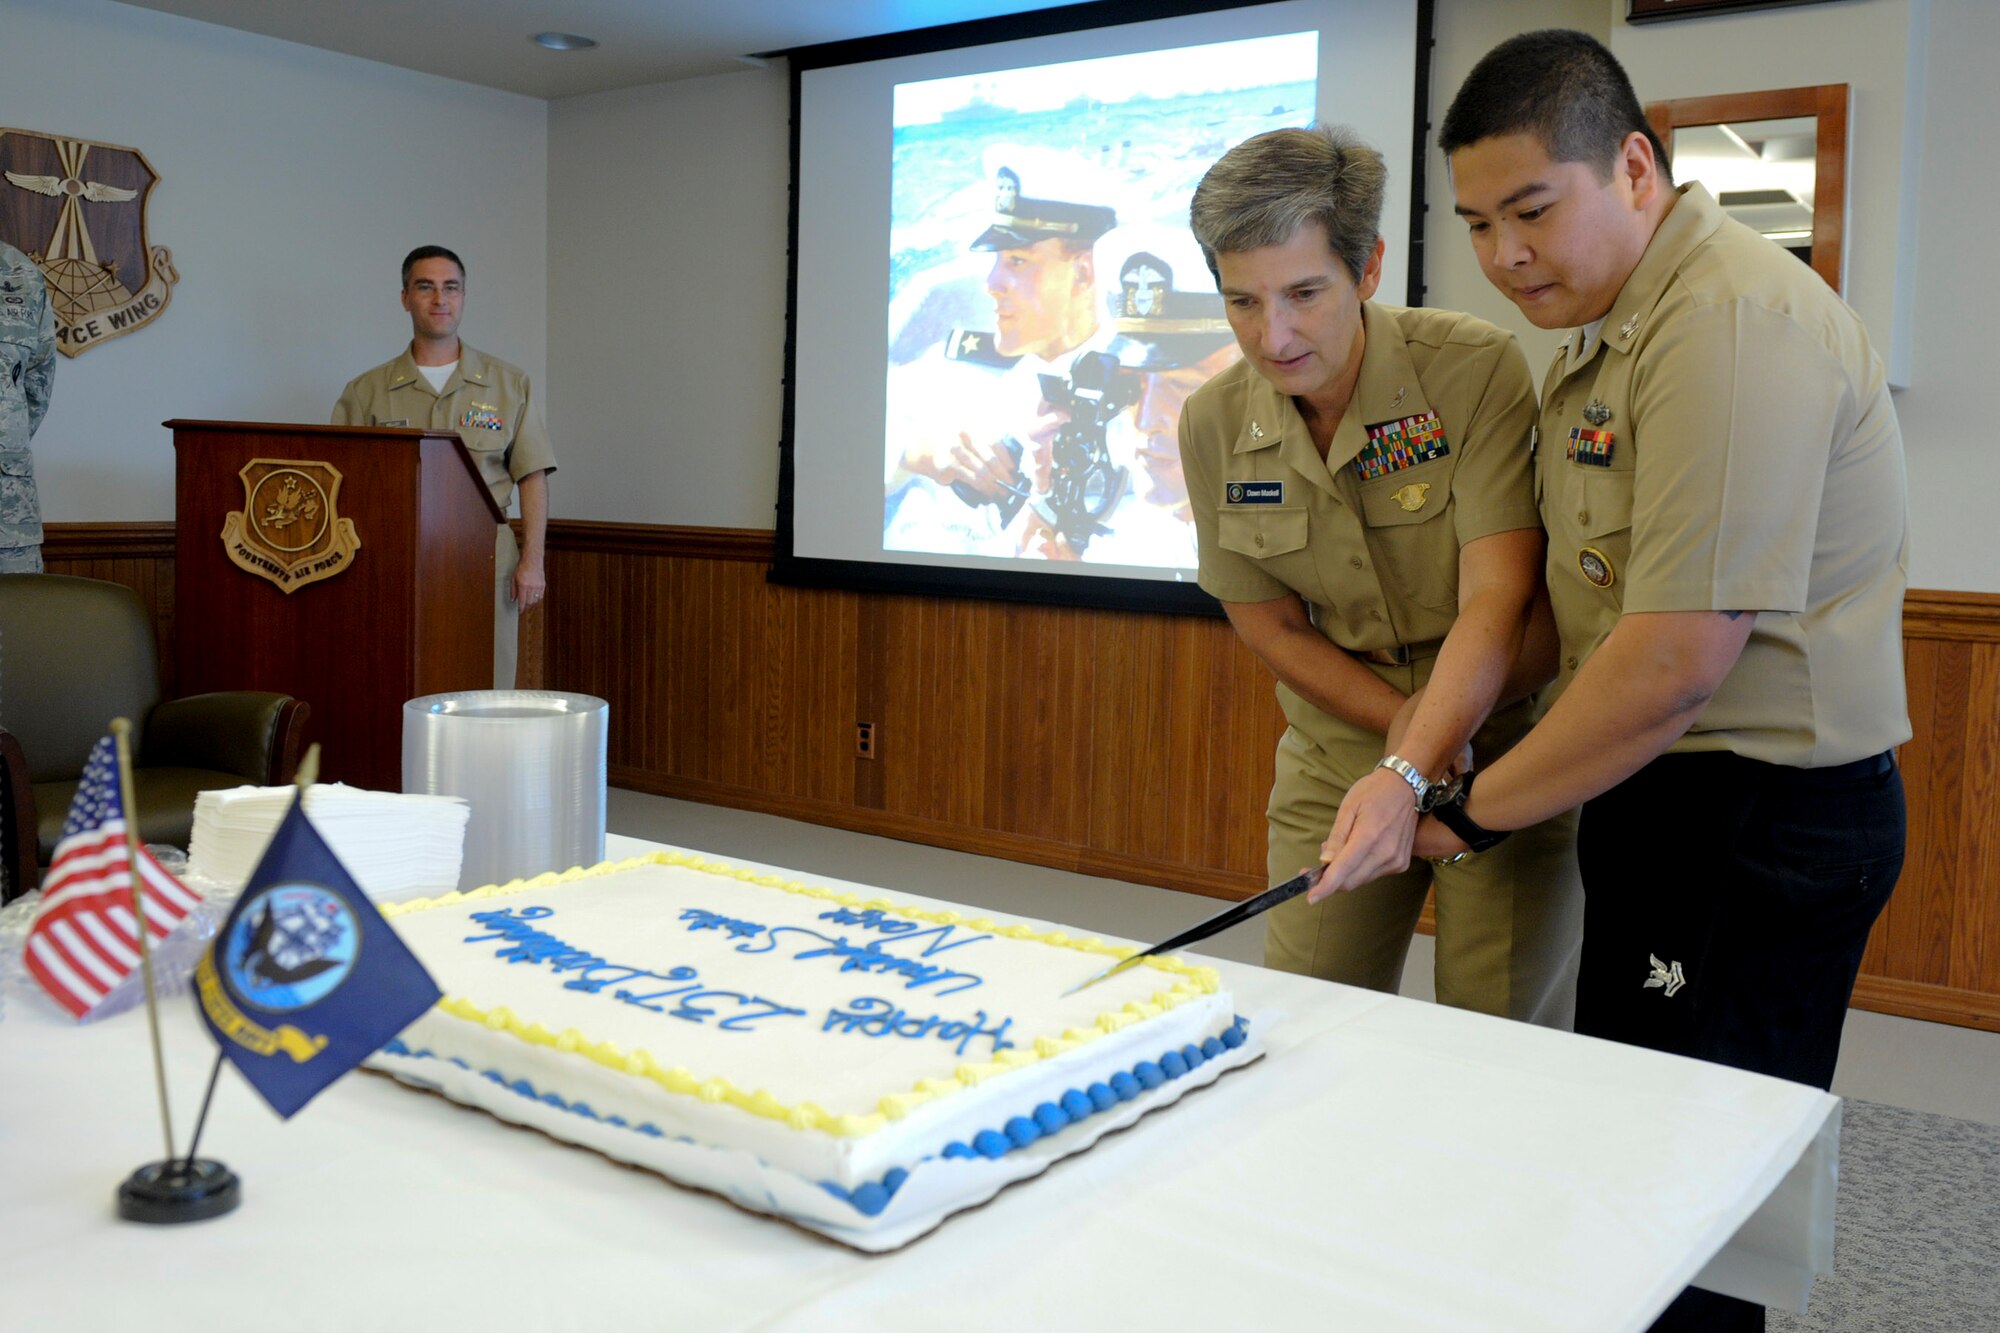 VANDENBERG AIR FORCE BASE, Calif. -- Capt. Dawn Maskell, the Joint Functional Component Command for Space chief of staff, and Petty Officer 2nd Class Glennaldrin Mupas, a 614th Air Operations Center member, cut the birthday cake during the U.S. Navy's 237th Birthday celebration here Friday, Oct 12, 2012. Currently a modern force of 287 ships and more than 3,700 aircraft, our Navy was created in 1775 with the establishment of the Continental Navy to sail against British merchant ships. (U.S. Air Force photo/Staff Sgt. Levi Riendeau)
